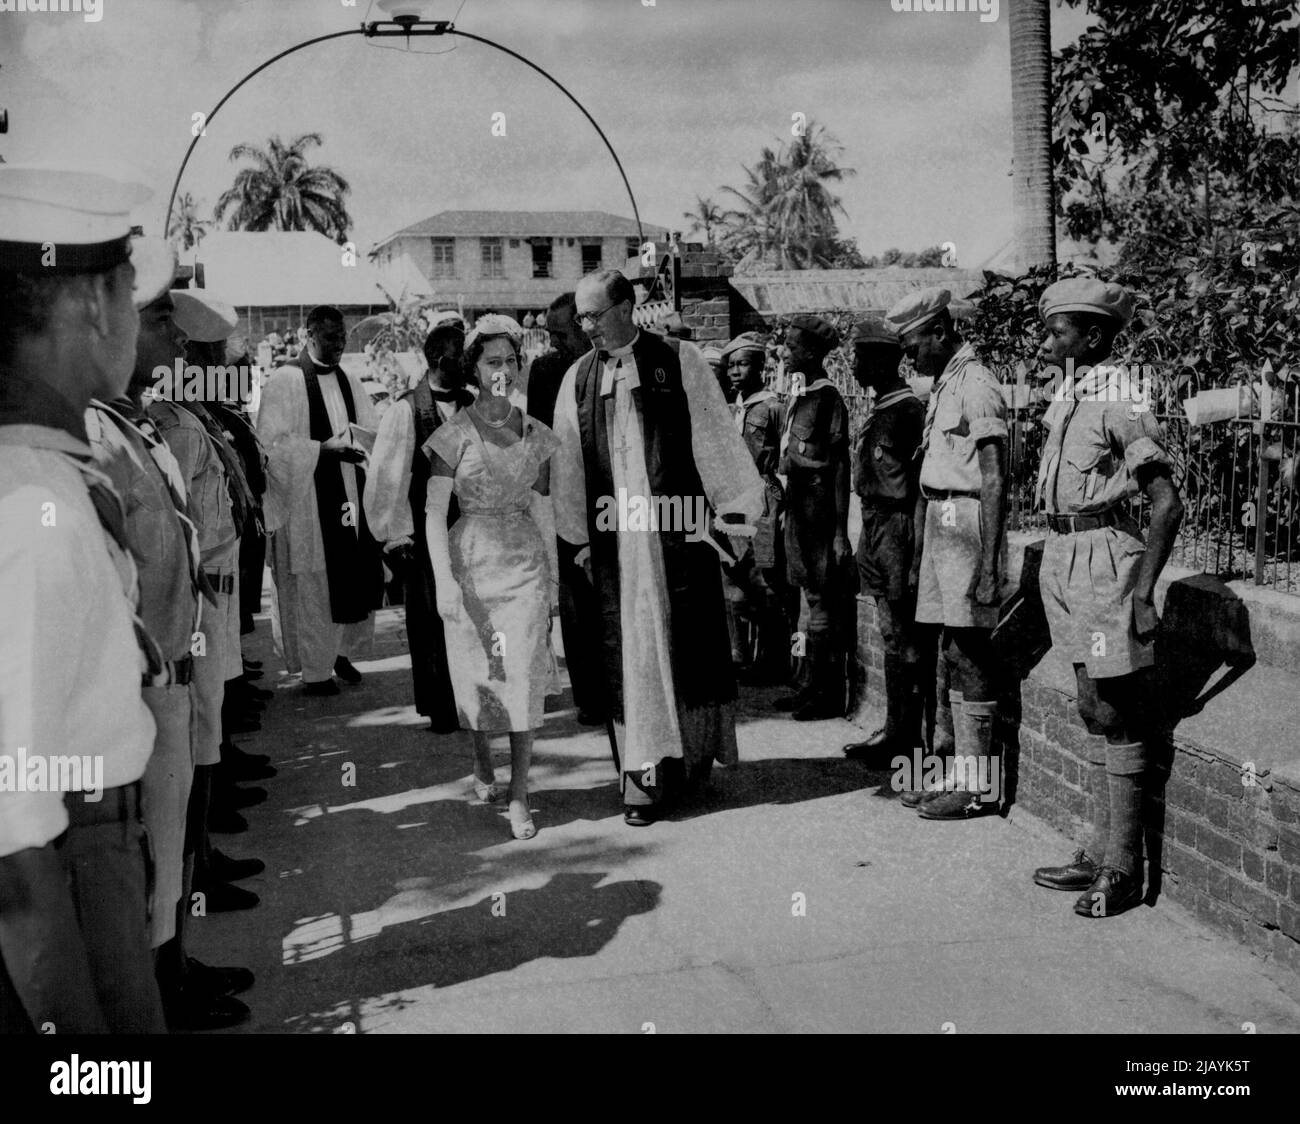 Princess Margaret, accompanied by an unidentified clergyman, arrives at church in Spanish Town, Jamaica, to attend services, Feb. 20. February 21, 1955. (Photo by Associated Press Photo). Stock Photo